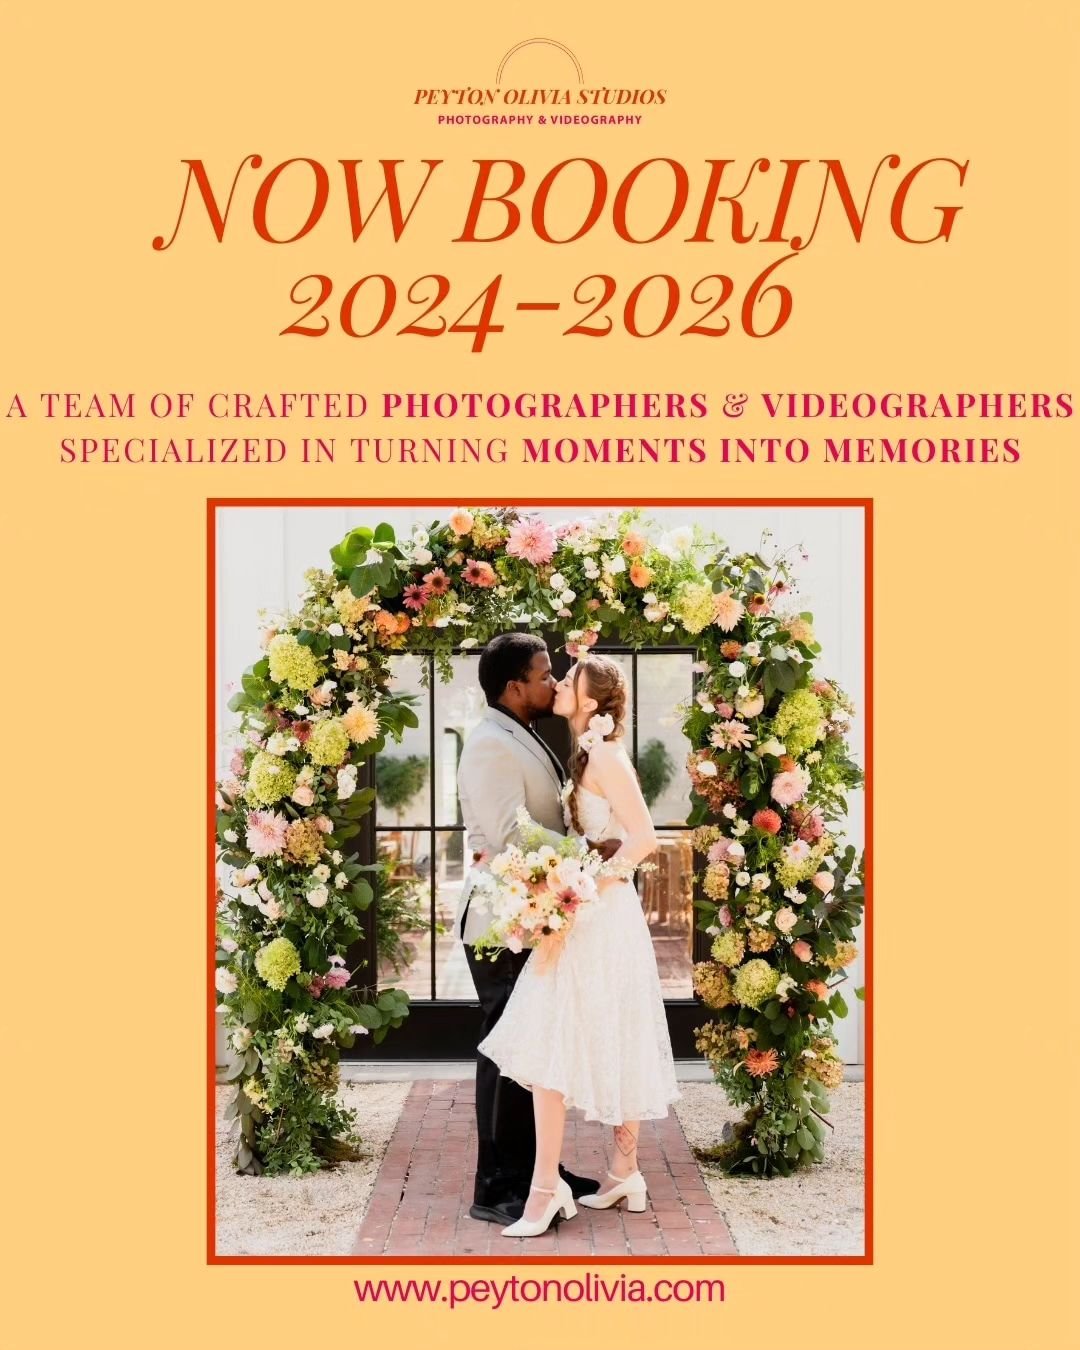 Our books are open for the rest of 2024 (though Octobet is almost fully booked!)-2026 weddings!! 💛📸💍✨

Peyton Olivia Studios consists of a collective group of passionate digital (and film) artists based in Western Maryland, dedicated to capturing 